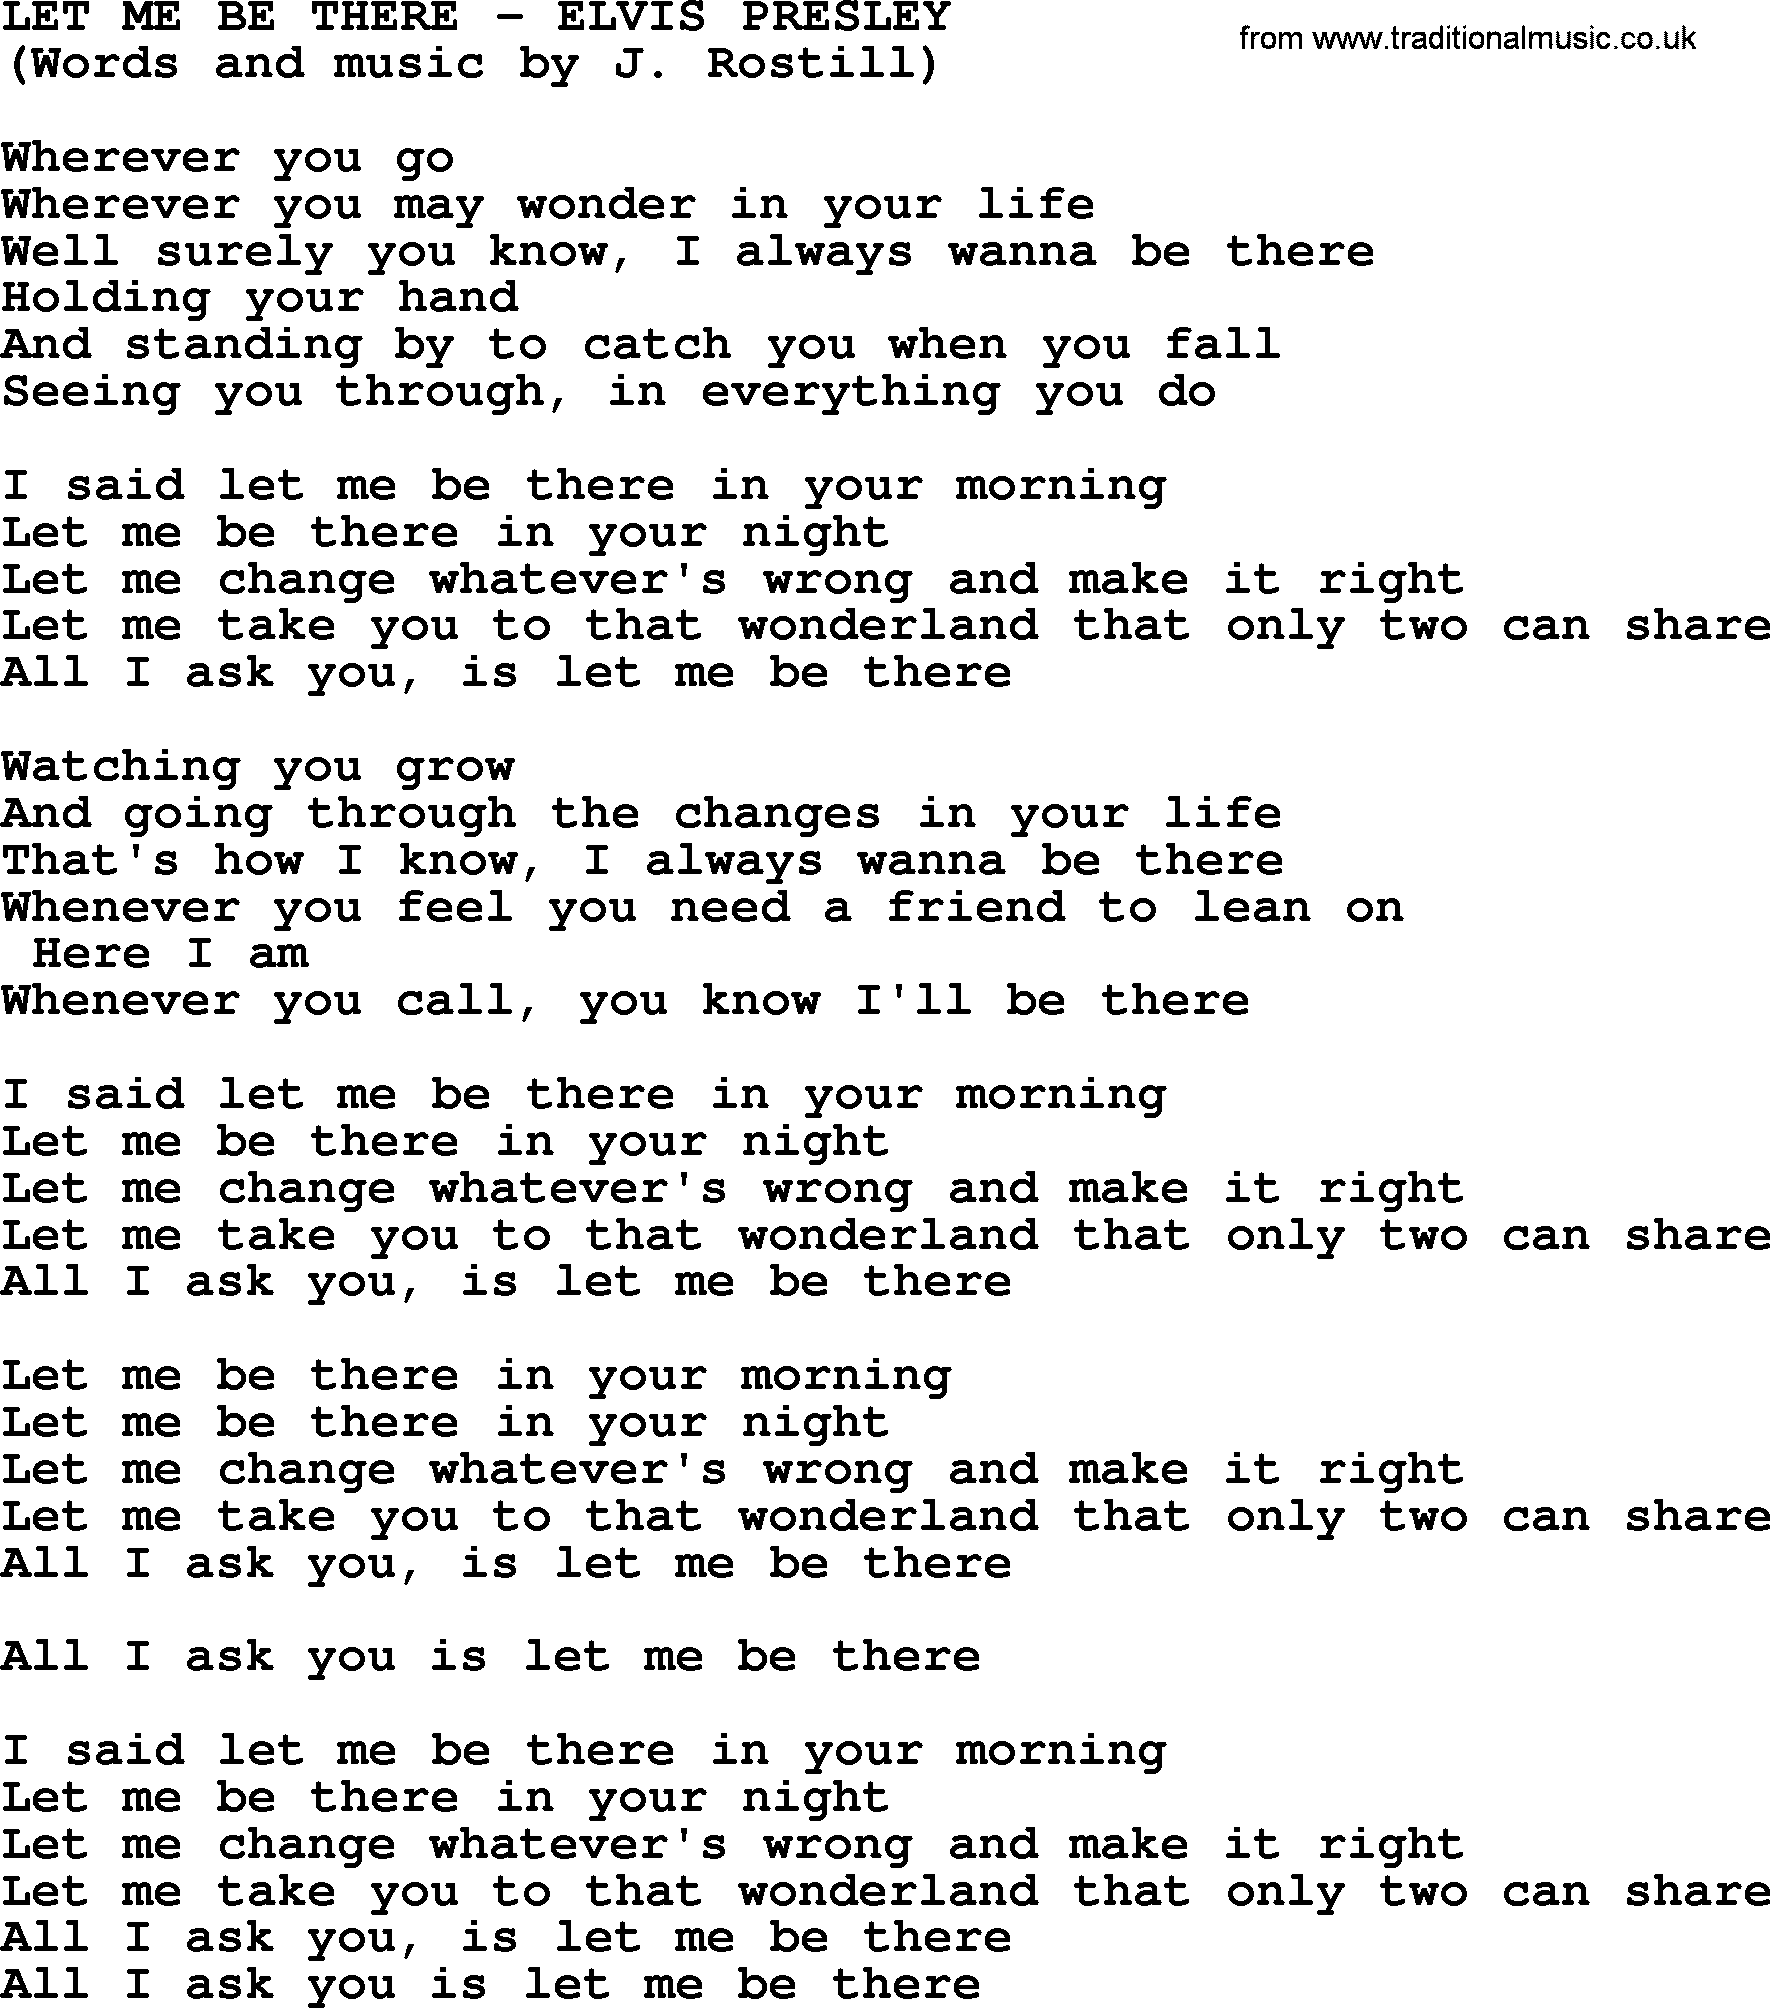 Elvis Presley song: Let Me Be There lyrics